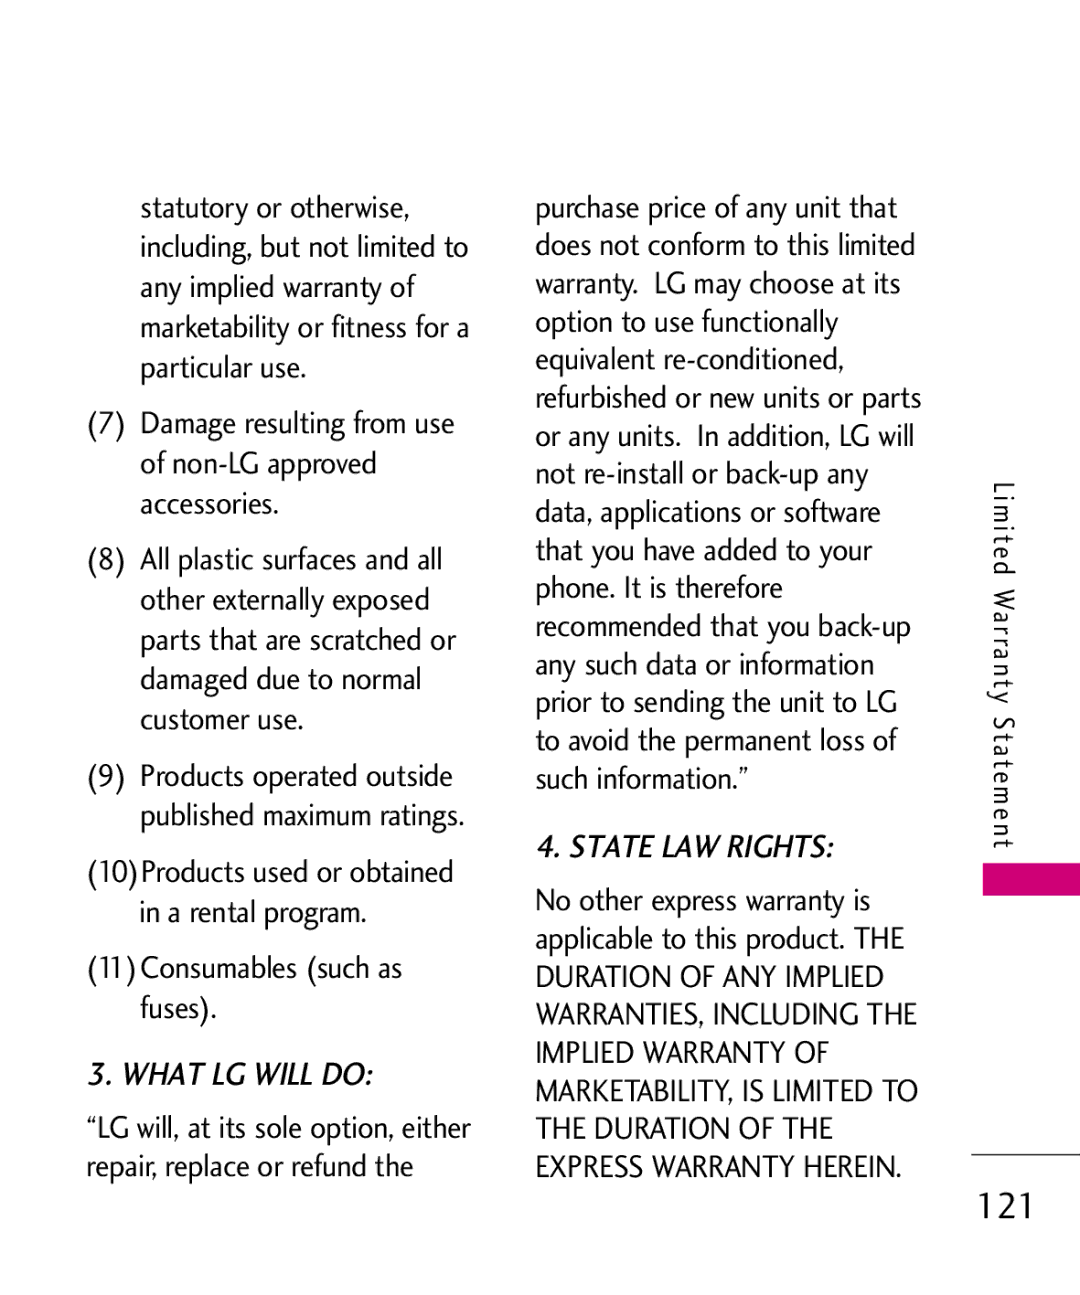 LG Electronics Glimmer manual Damage resulting from use of non-LG approved accessories, 11Consumables such as fuses 